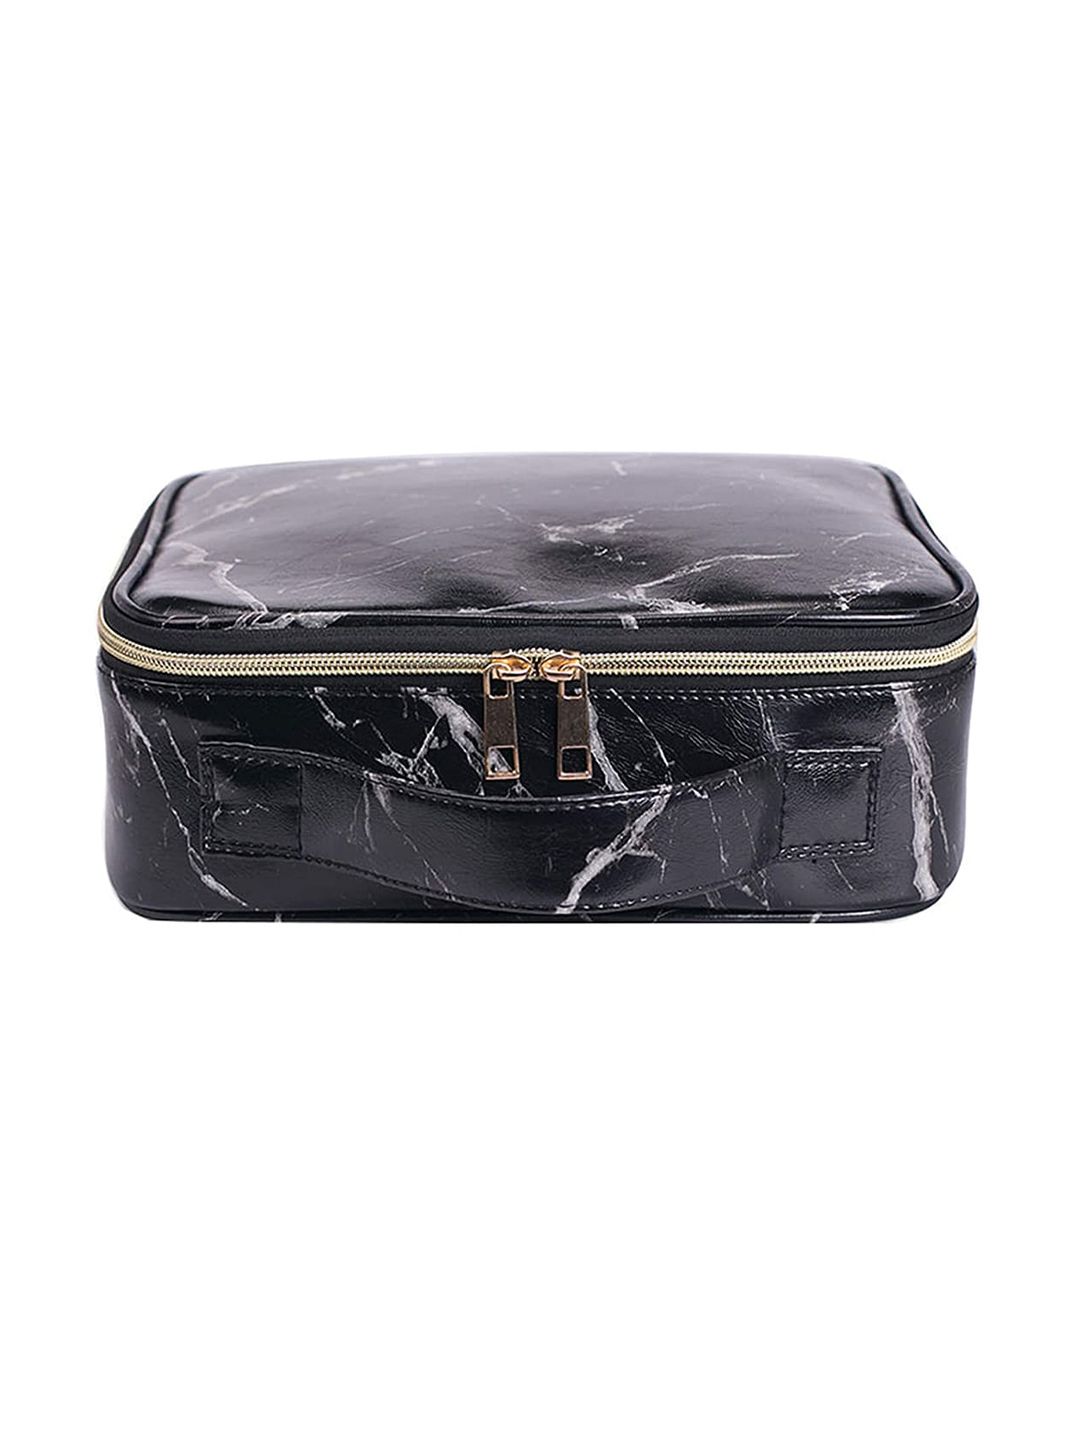 HOUSE OF QUIRK Women Black Printed Makeup Cosmetic Storage Case Price in India